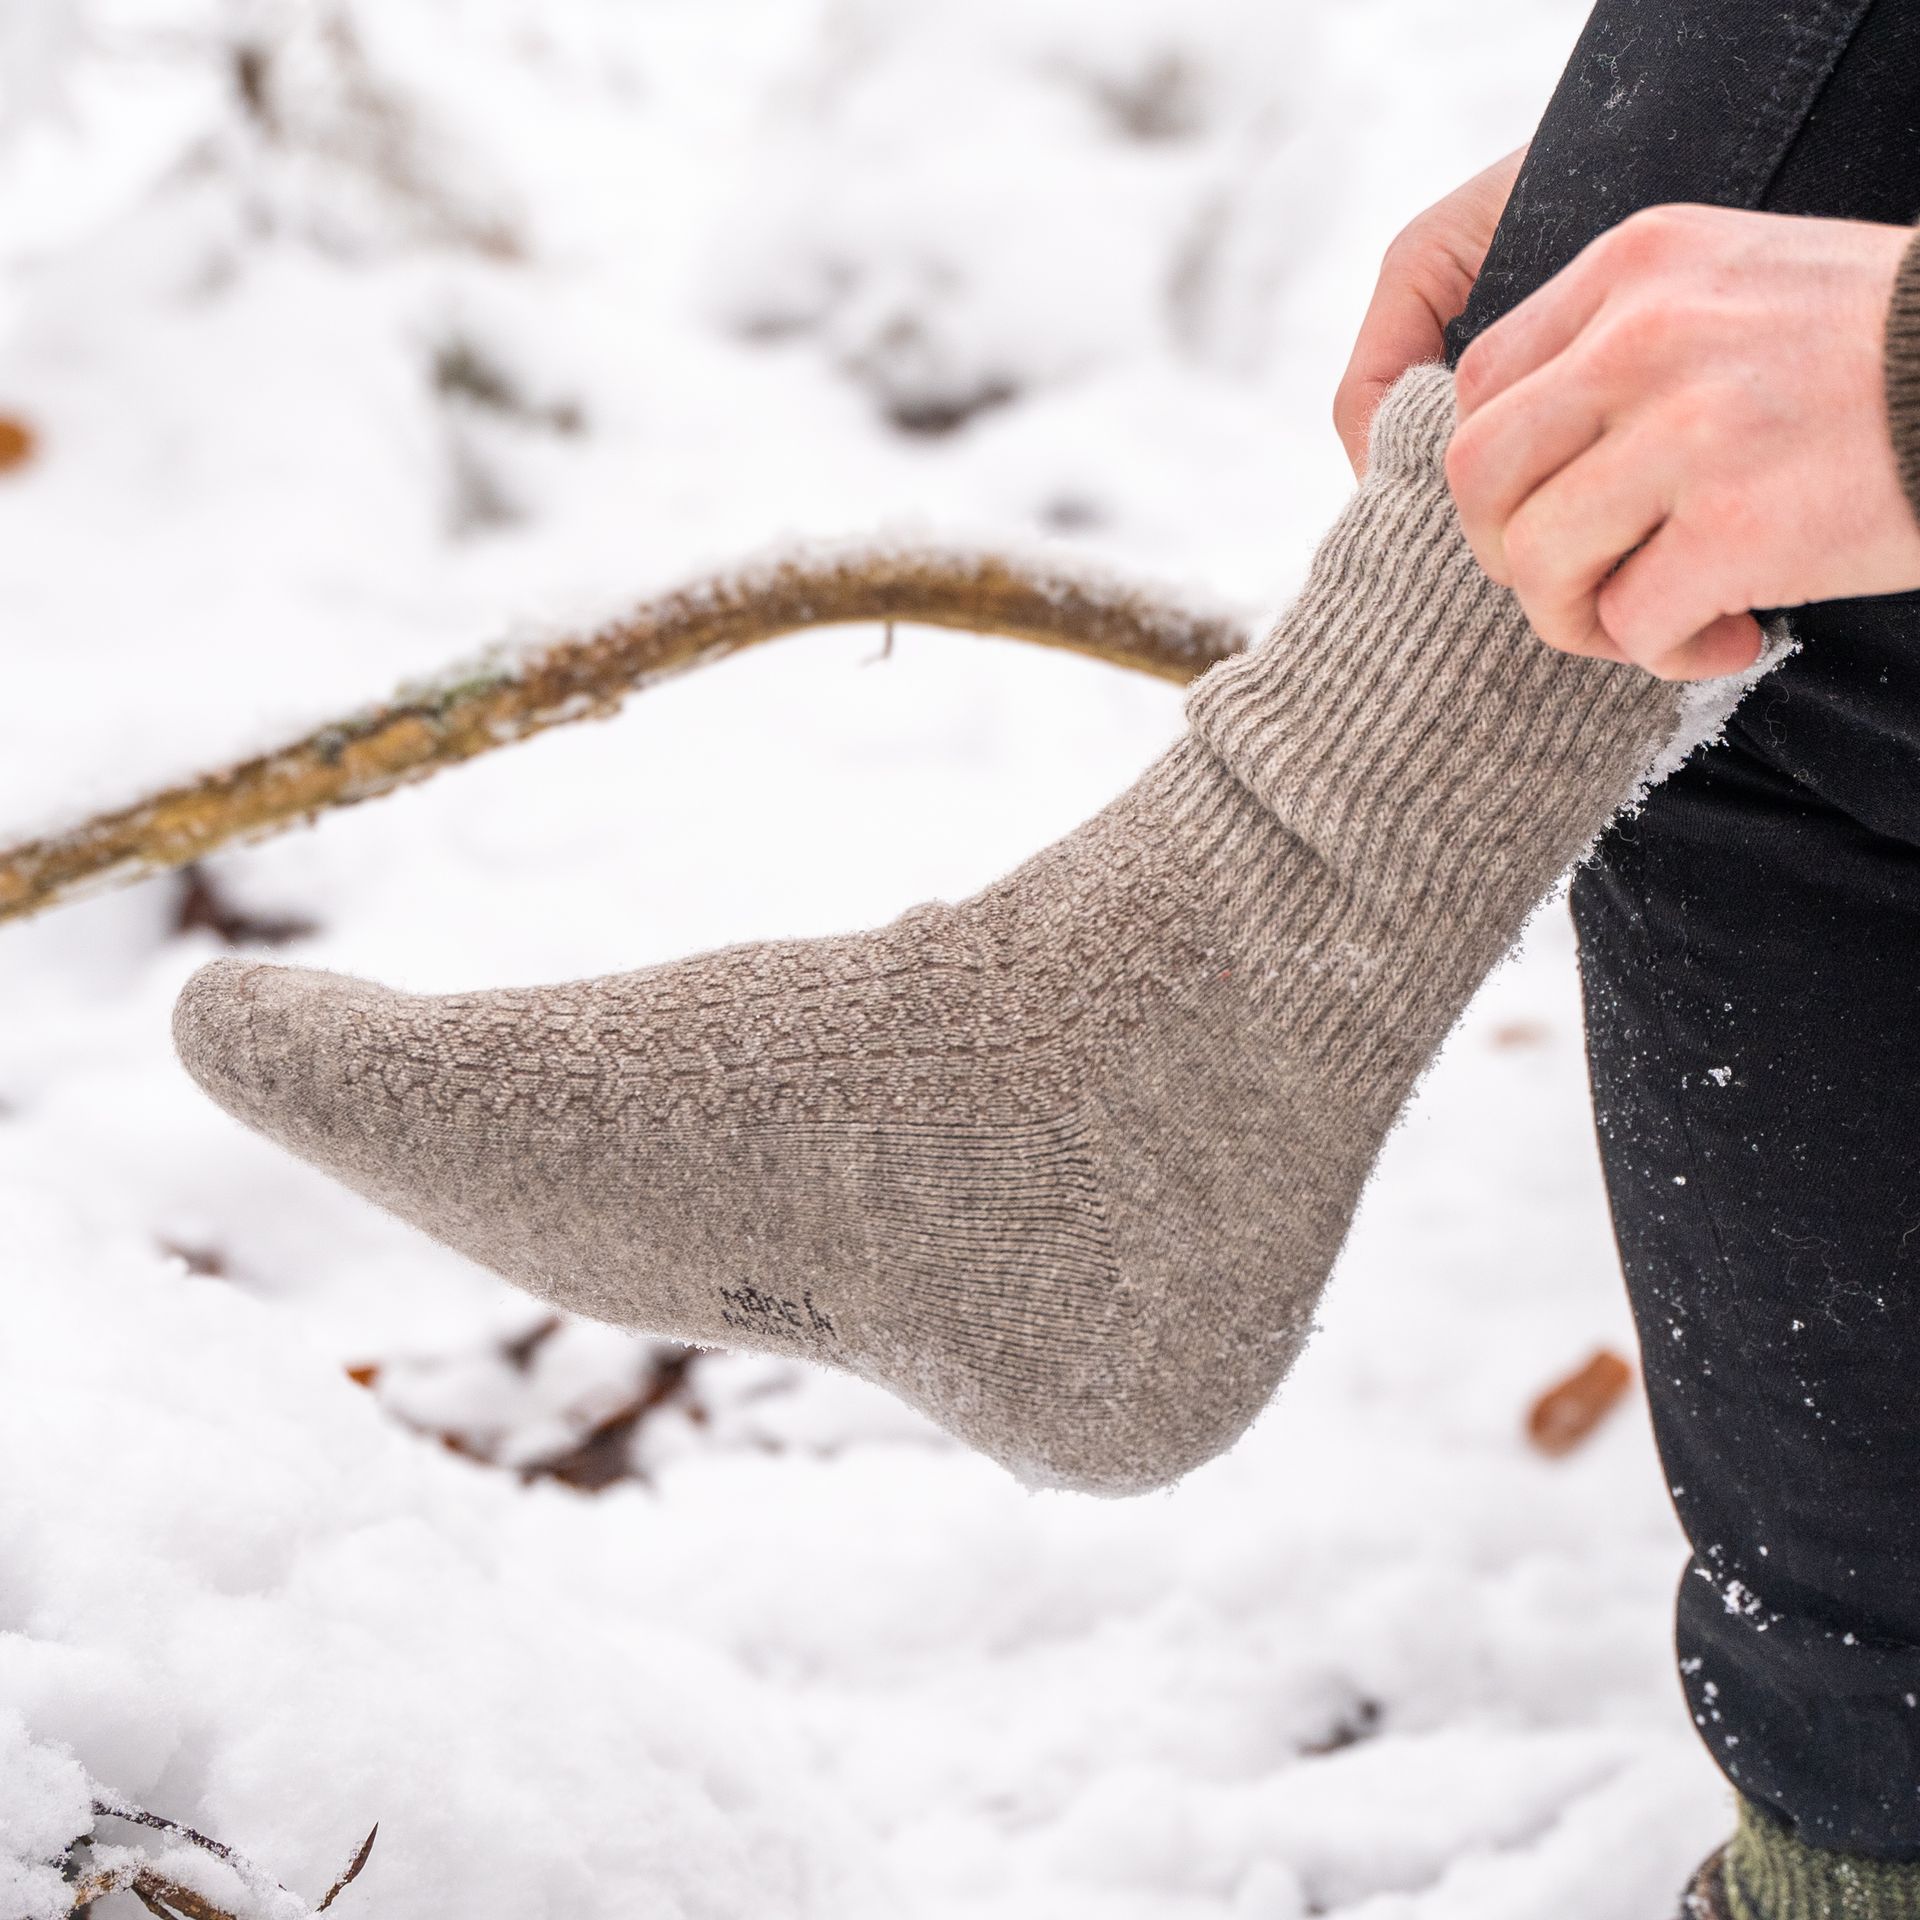 Natural grey socks are put on in a snow-covered landscape